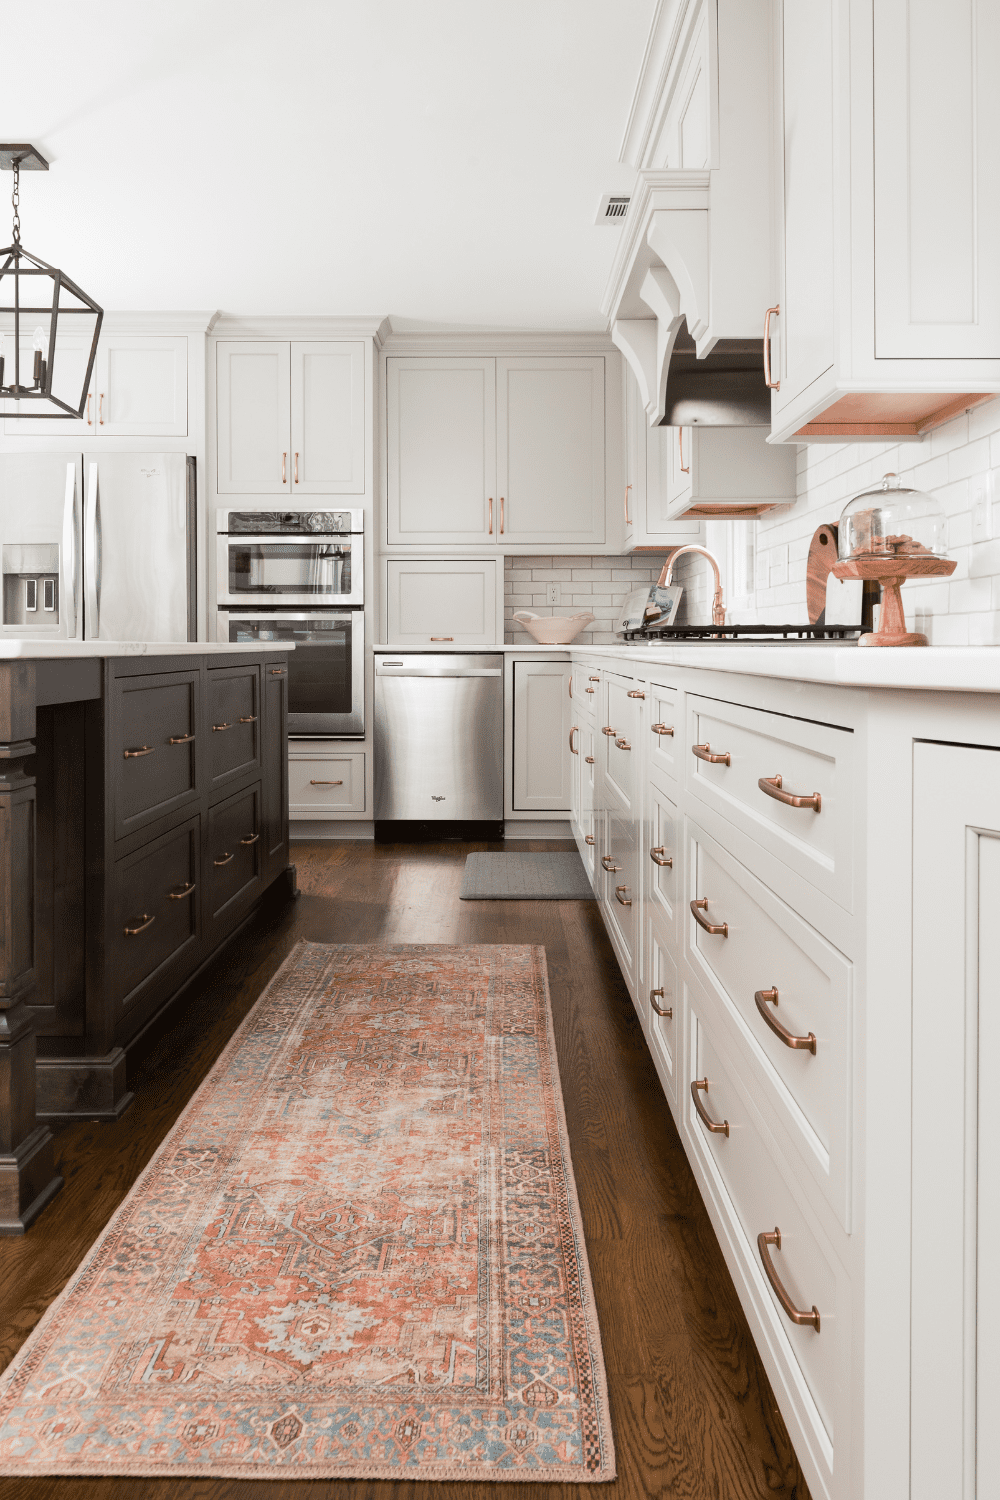 Nicholas Design Build | A kitchen with white cabinets and a rug.